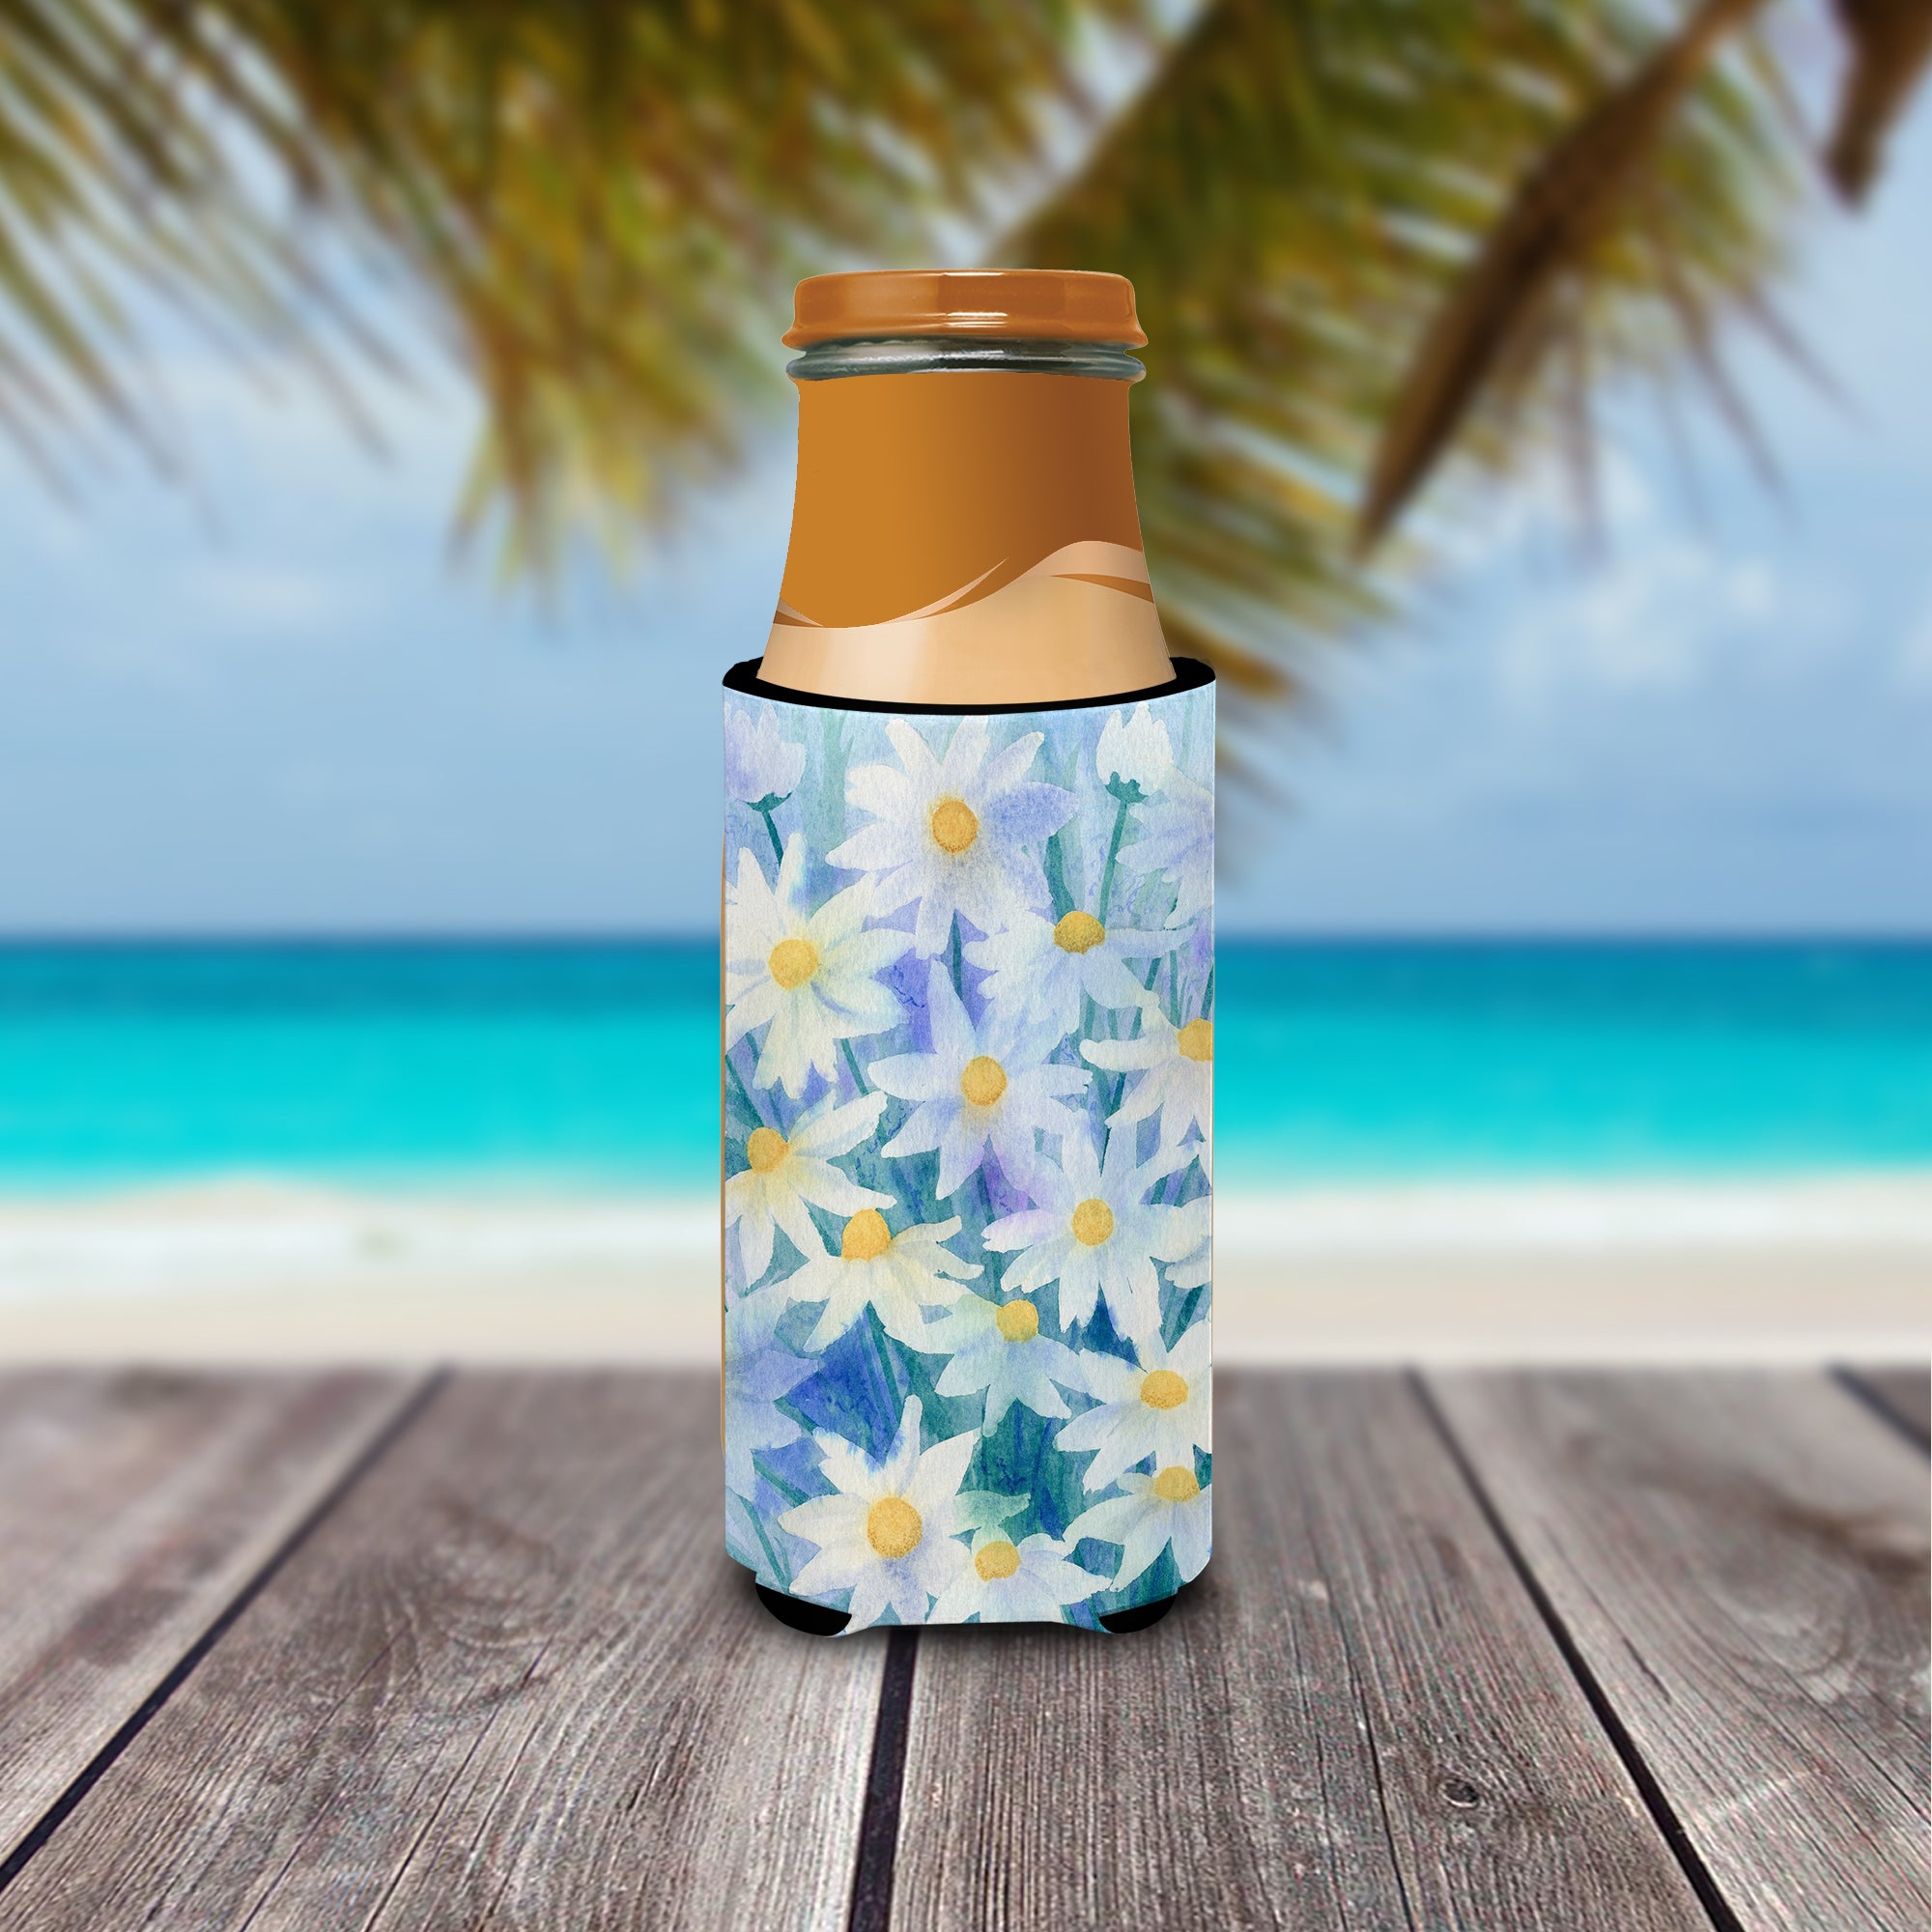 Light and Airy Daisies Ultra Beverage Insulators for slim cans IBD0255MUK